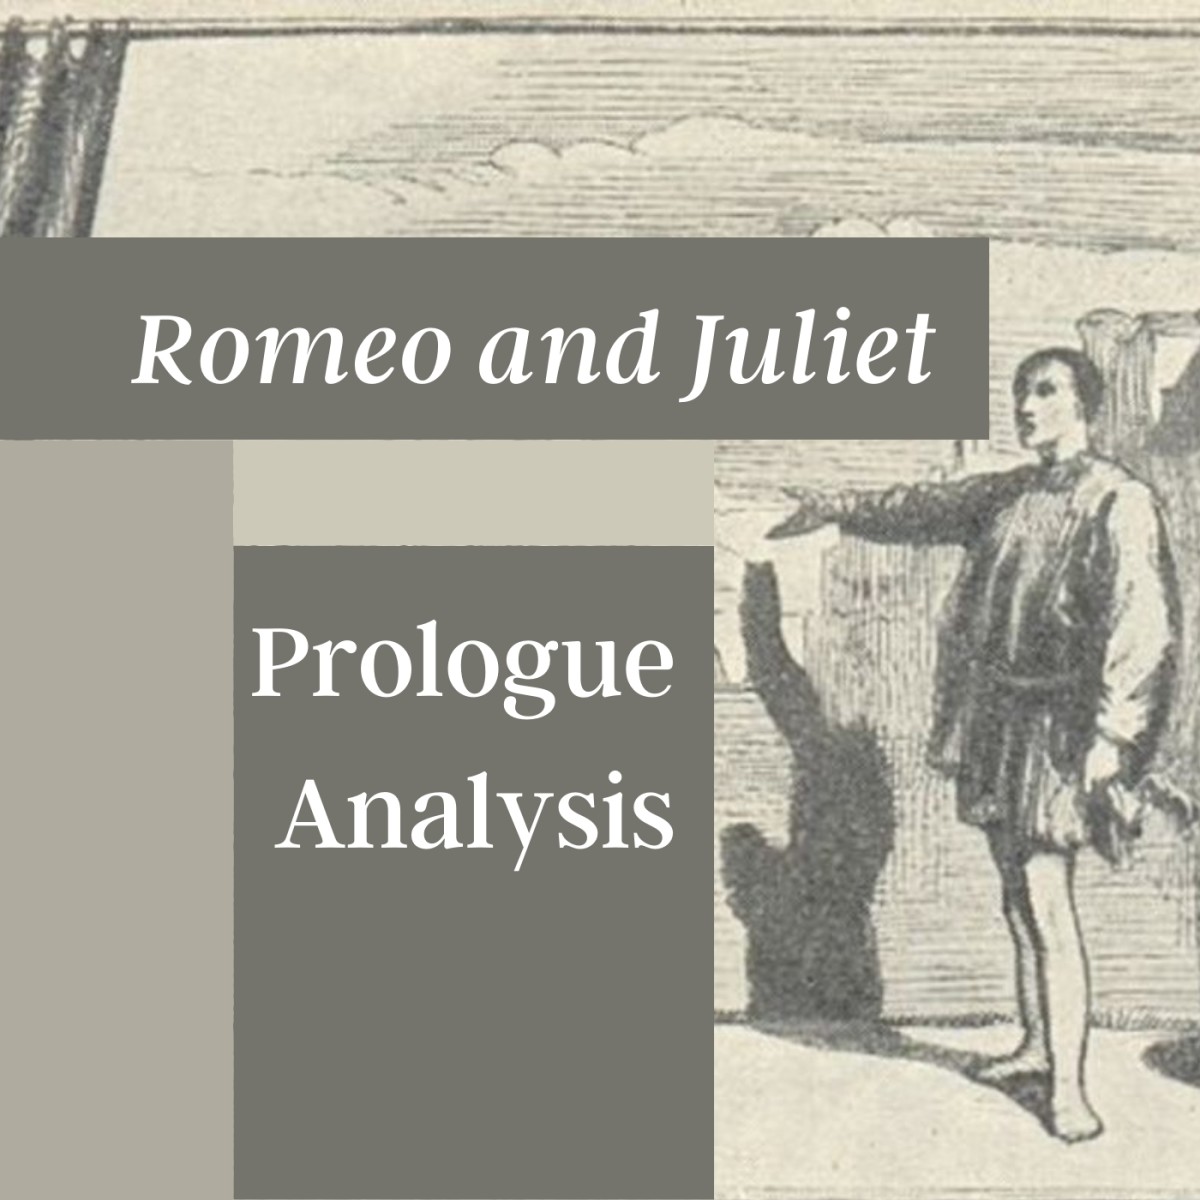 Romeo and Juliet Prologue Analysis, Line by Line